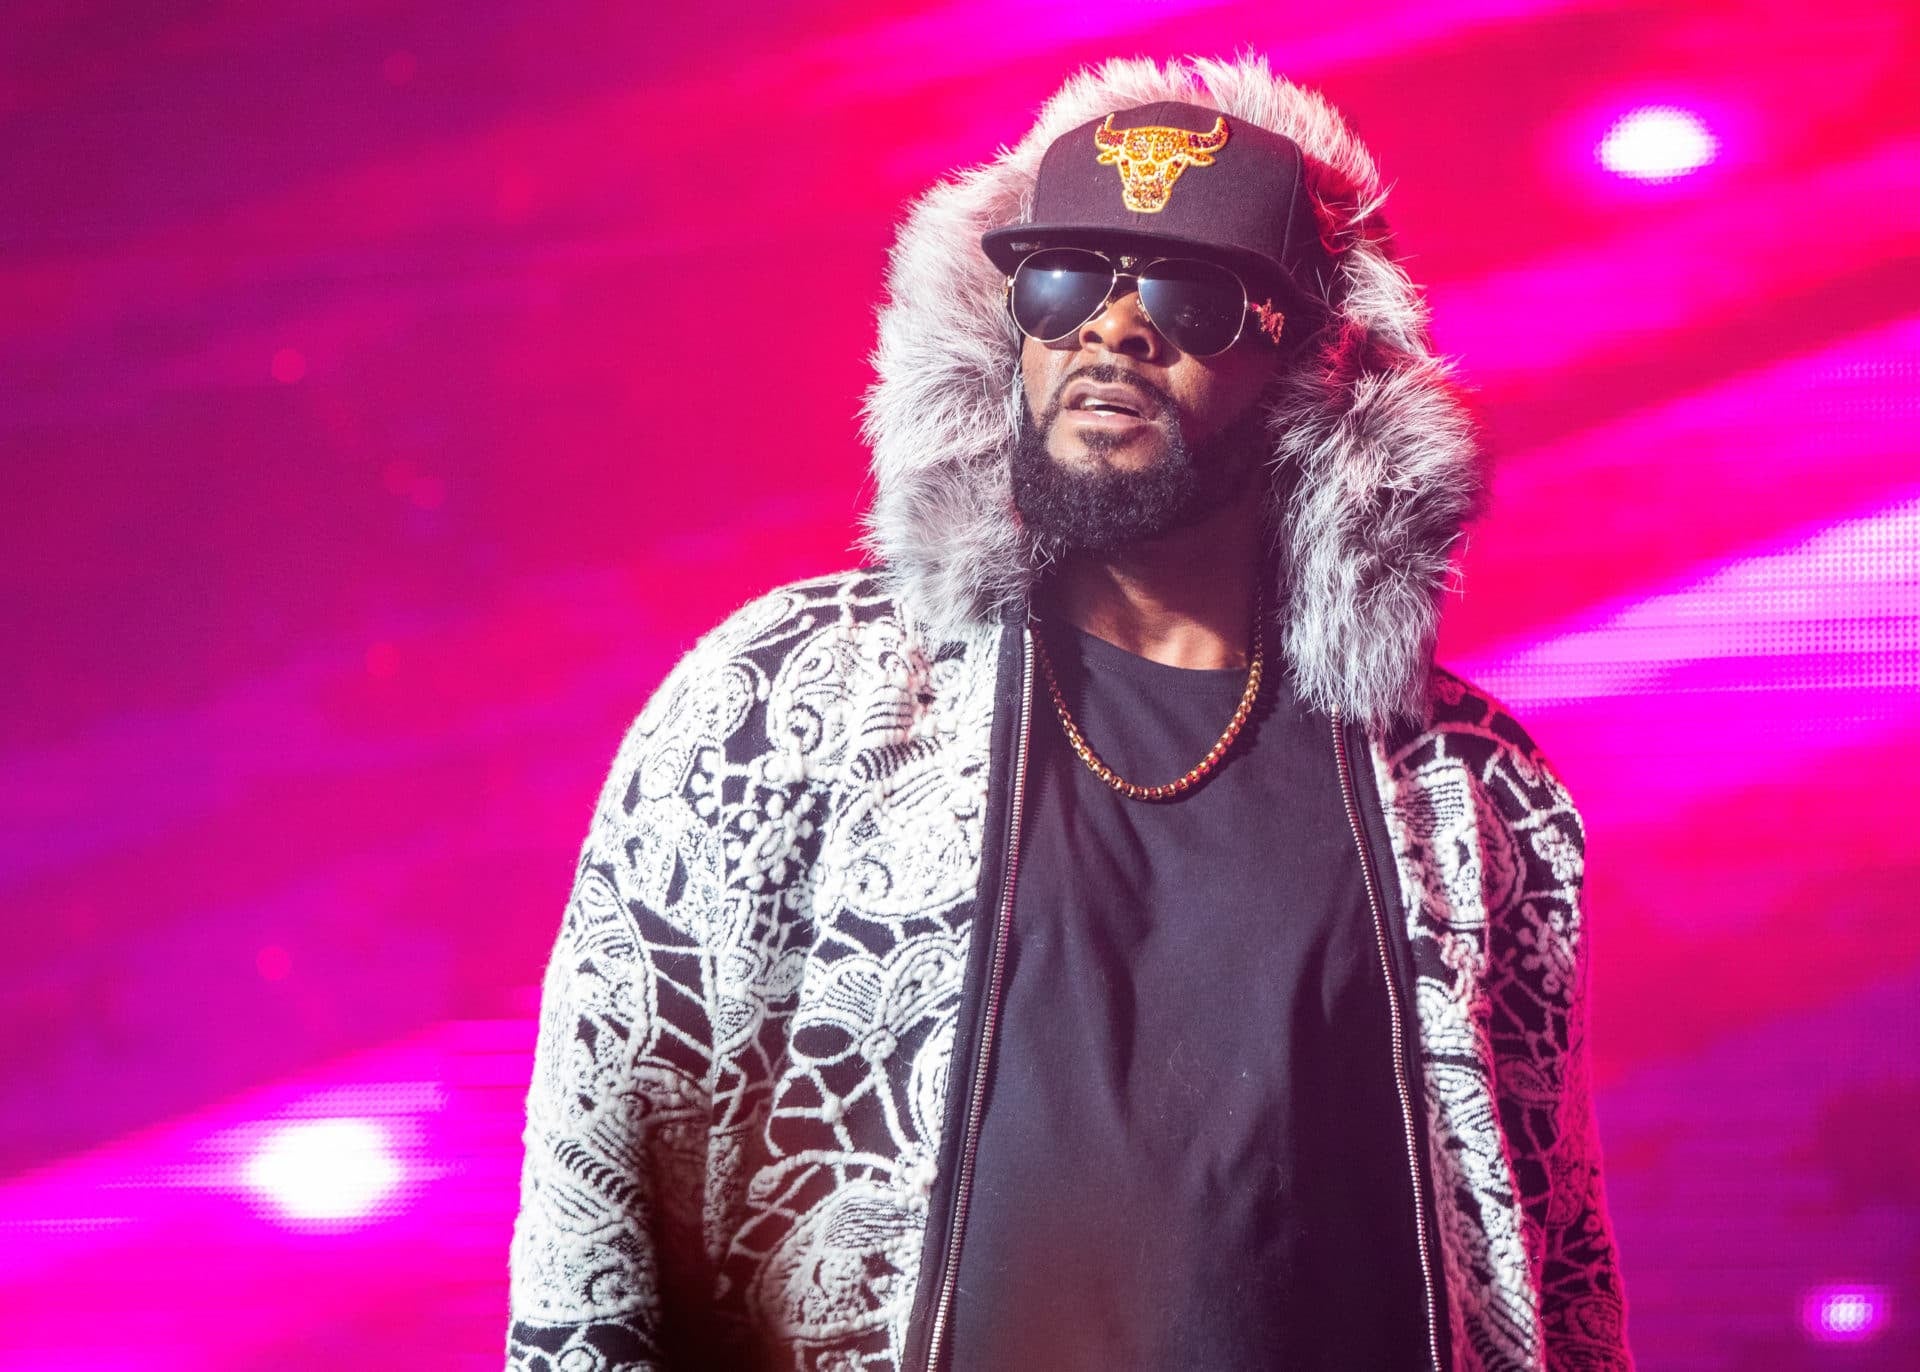 New Accuser Says R.Kelly Starting Sexually Abusing Her When She Was 16